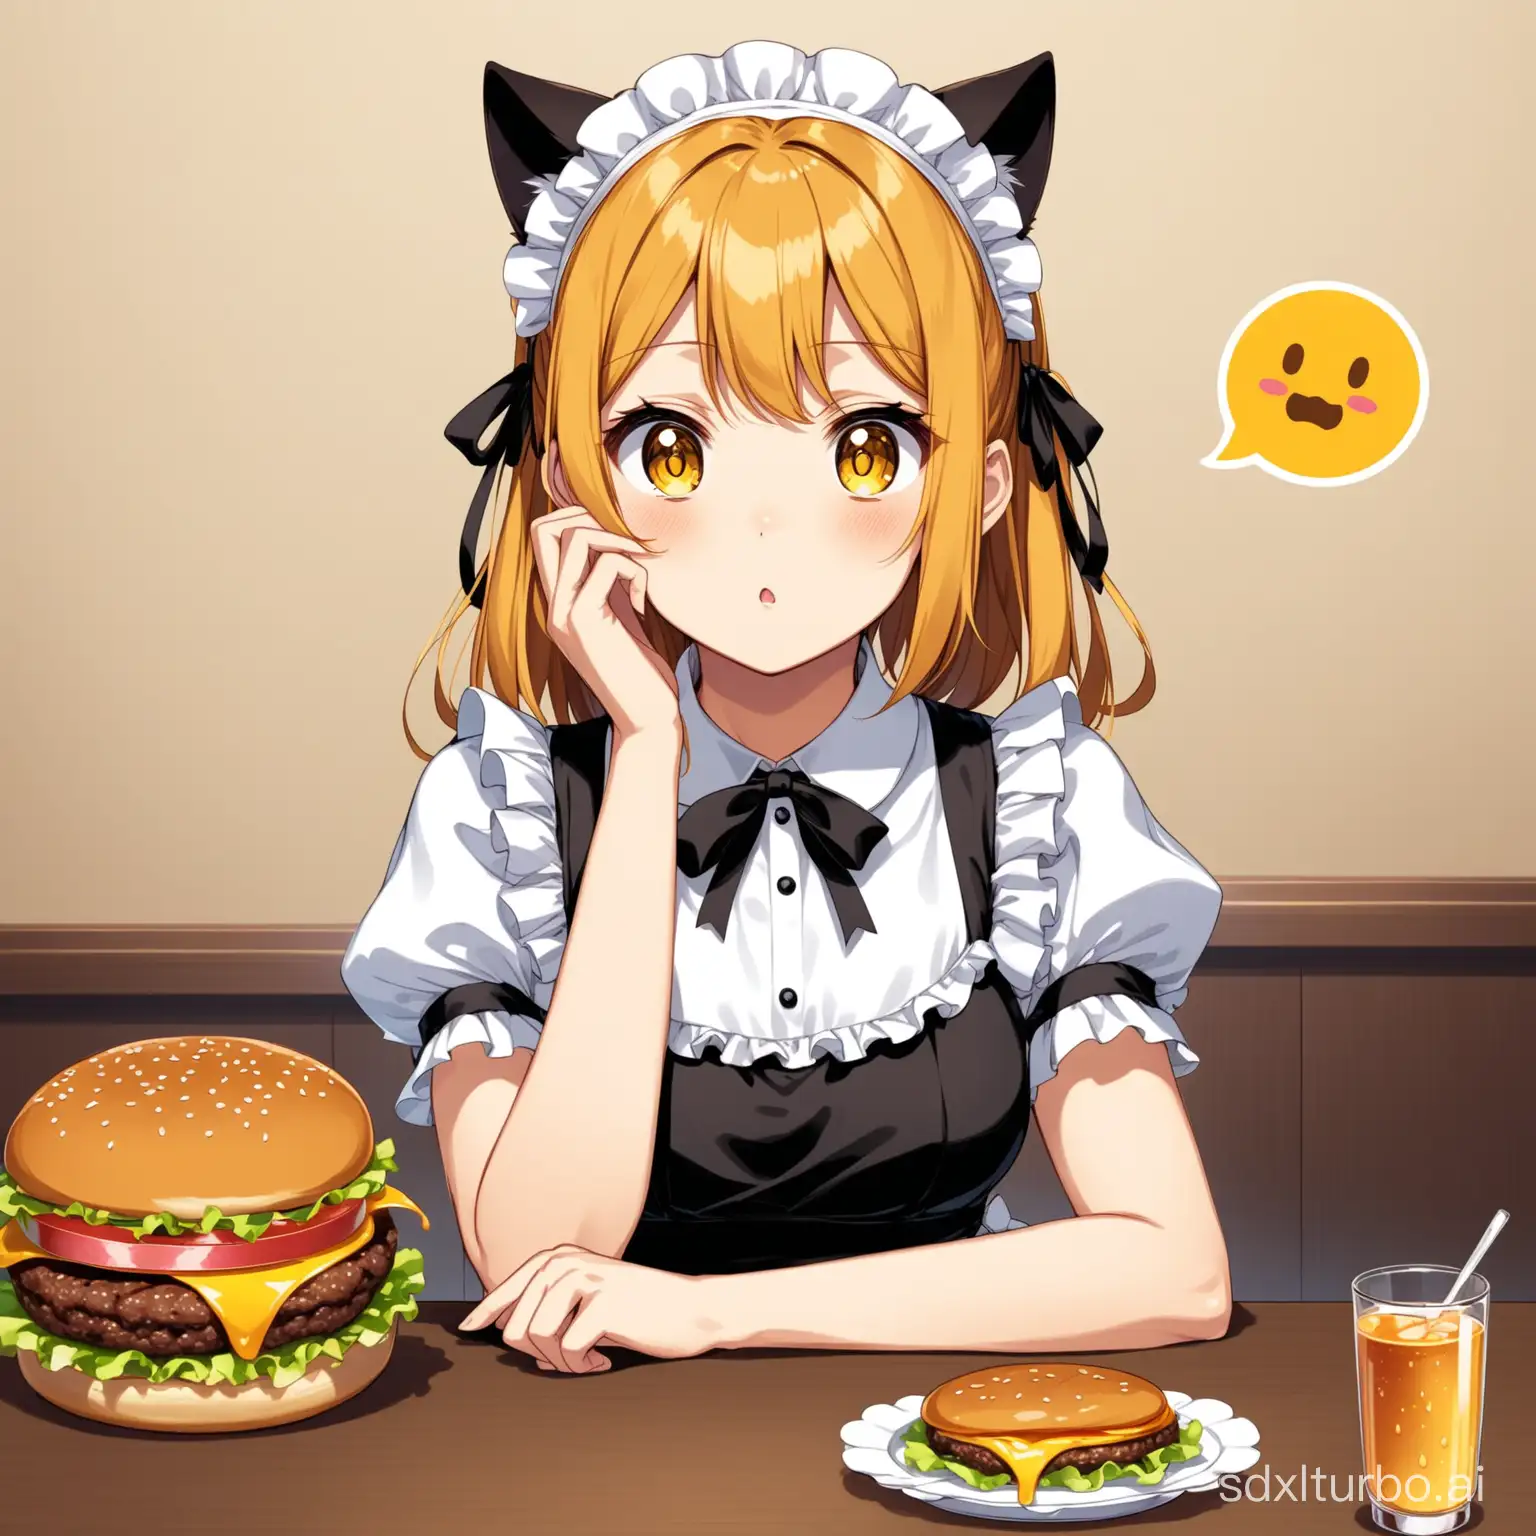 Pensive-Anime-Catgirl-Maid-Contemplates-Burger-on-Table